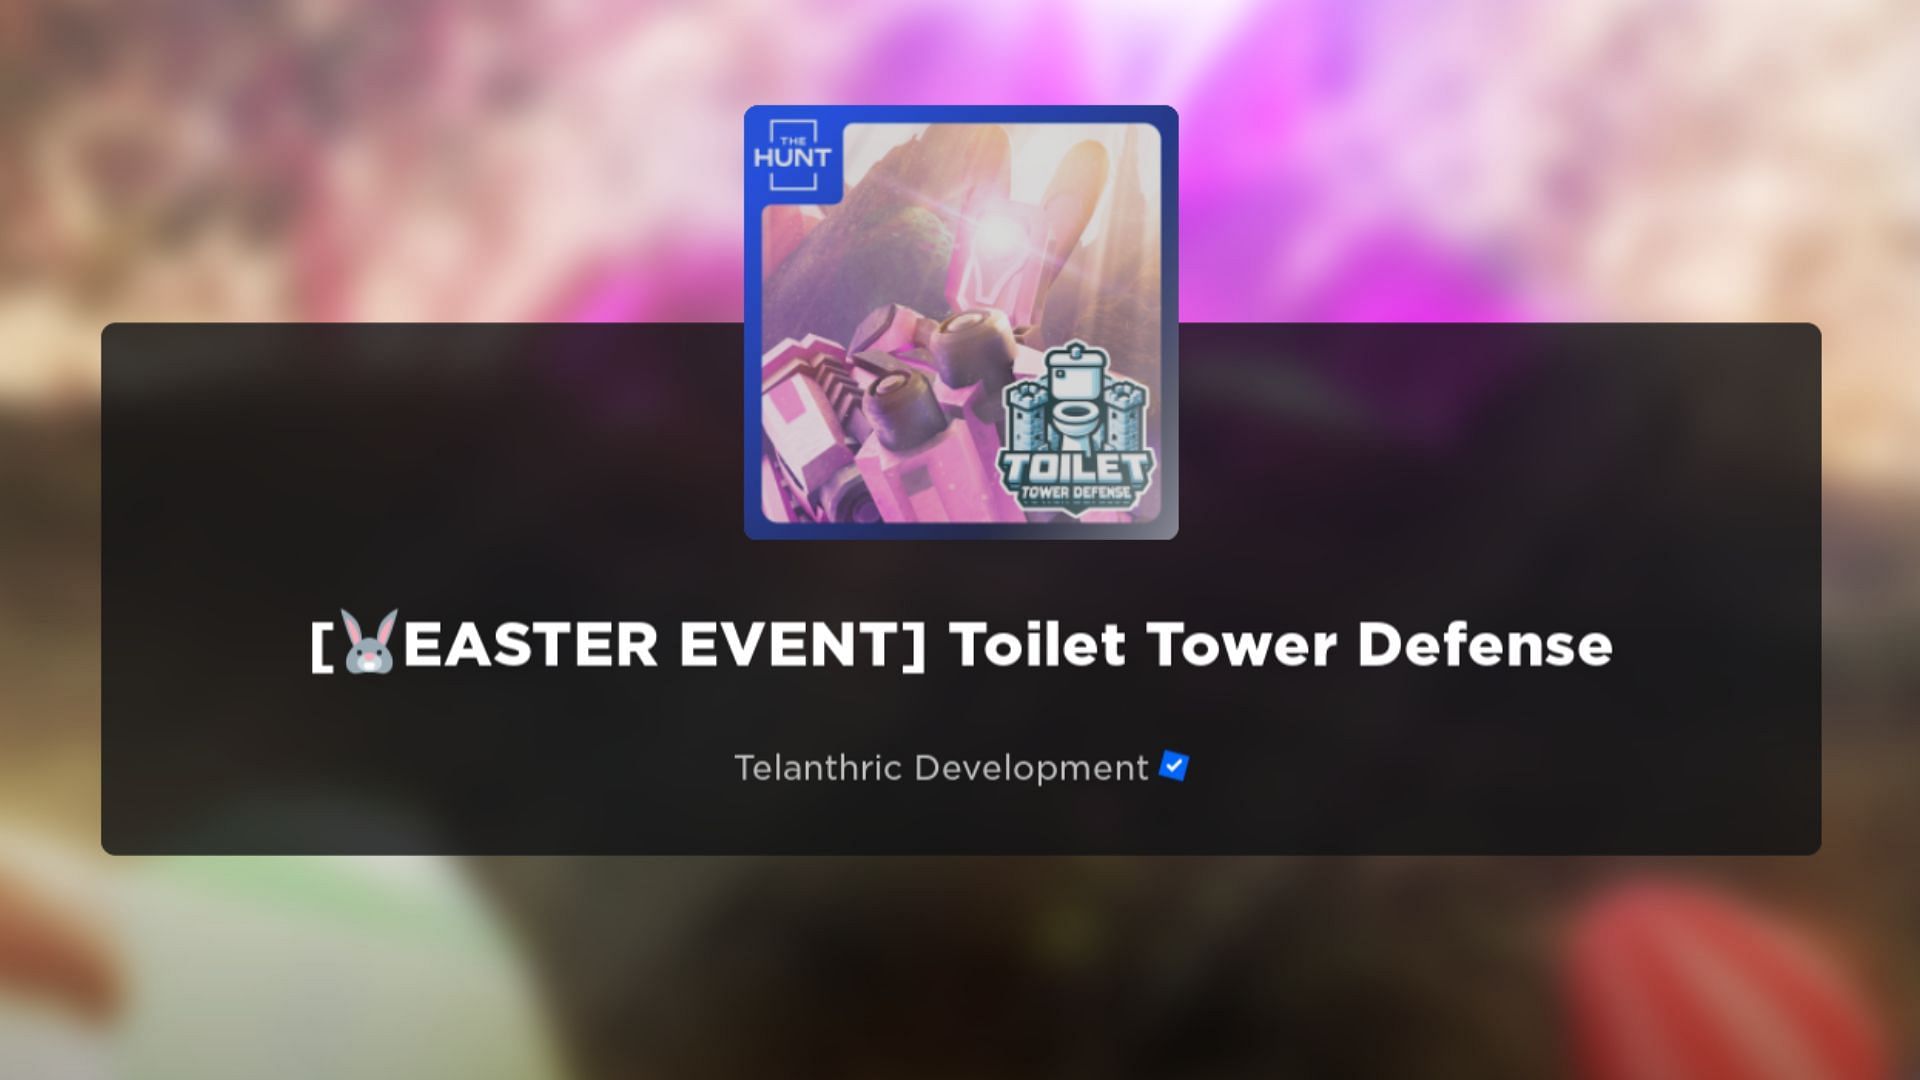 The Hunt in Toilet Tower Defense